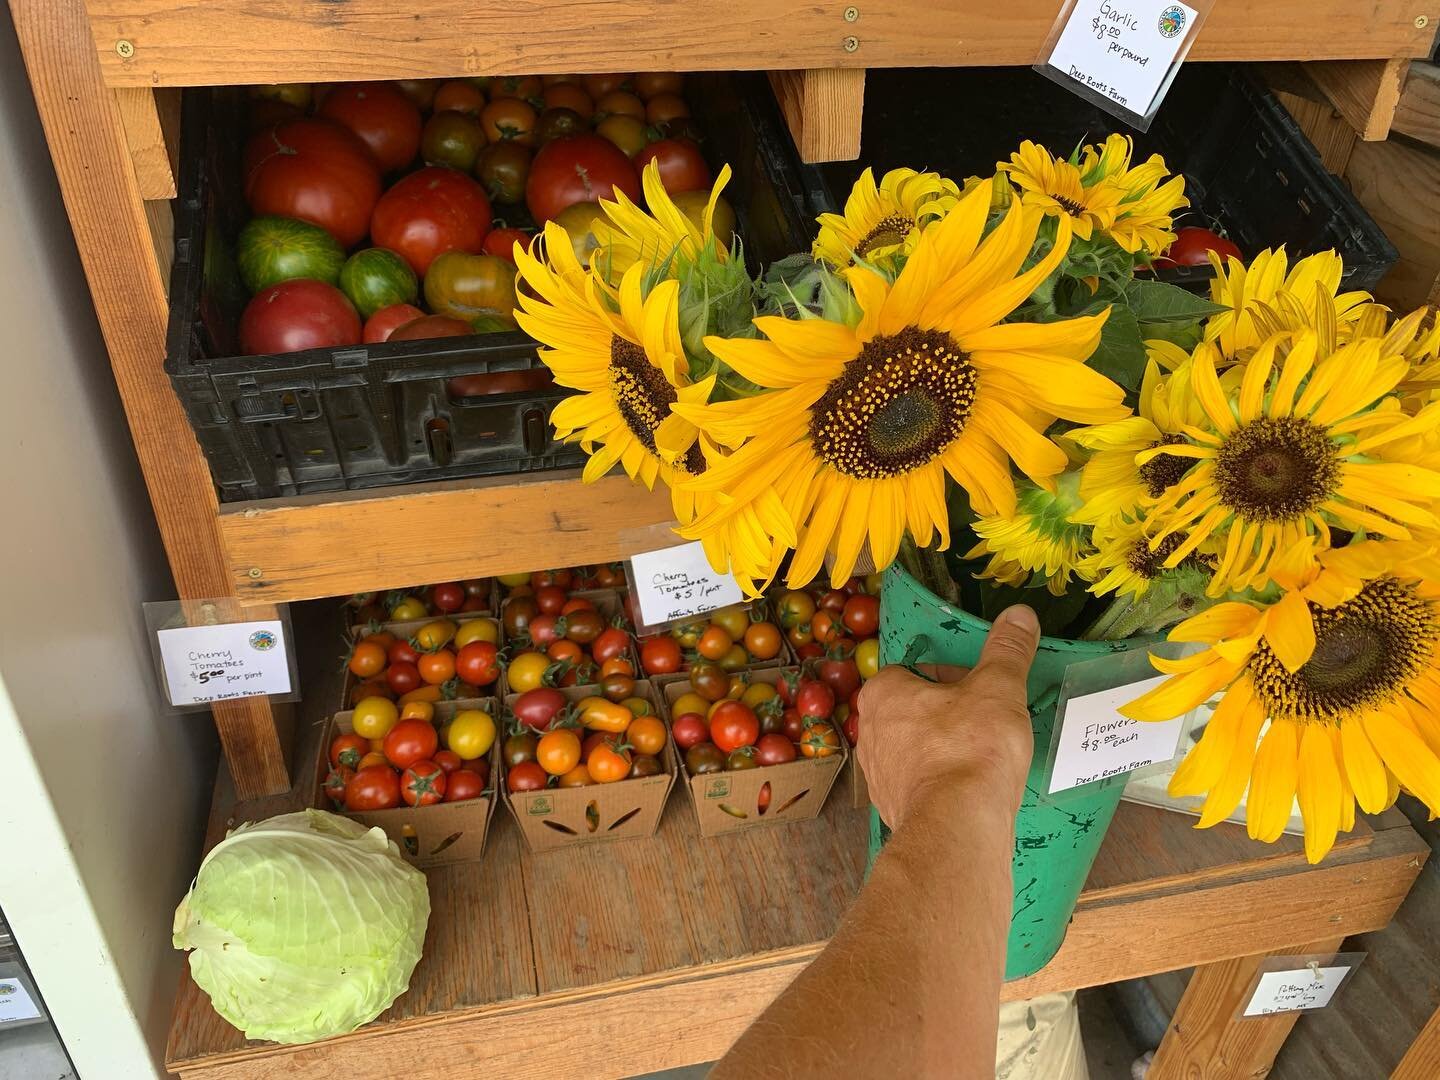 Lots of tomatoes, strawberries and sunflowers at the farmstand this weekend! Come brighten up your table and your plate with good flavors and colors!